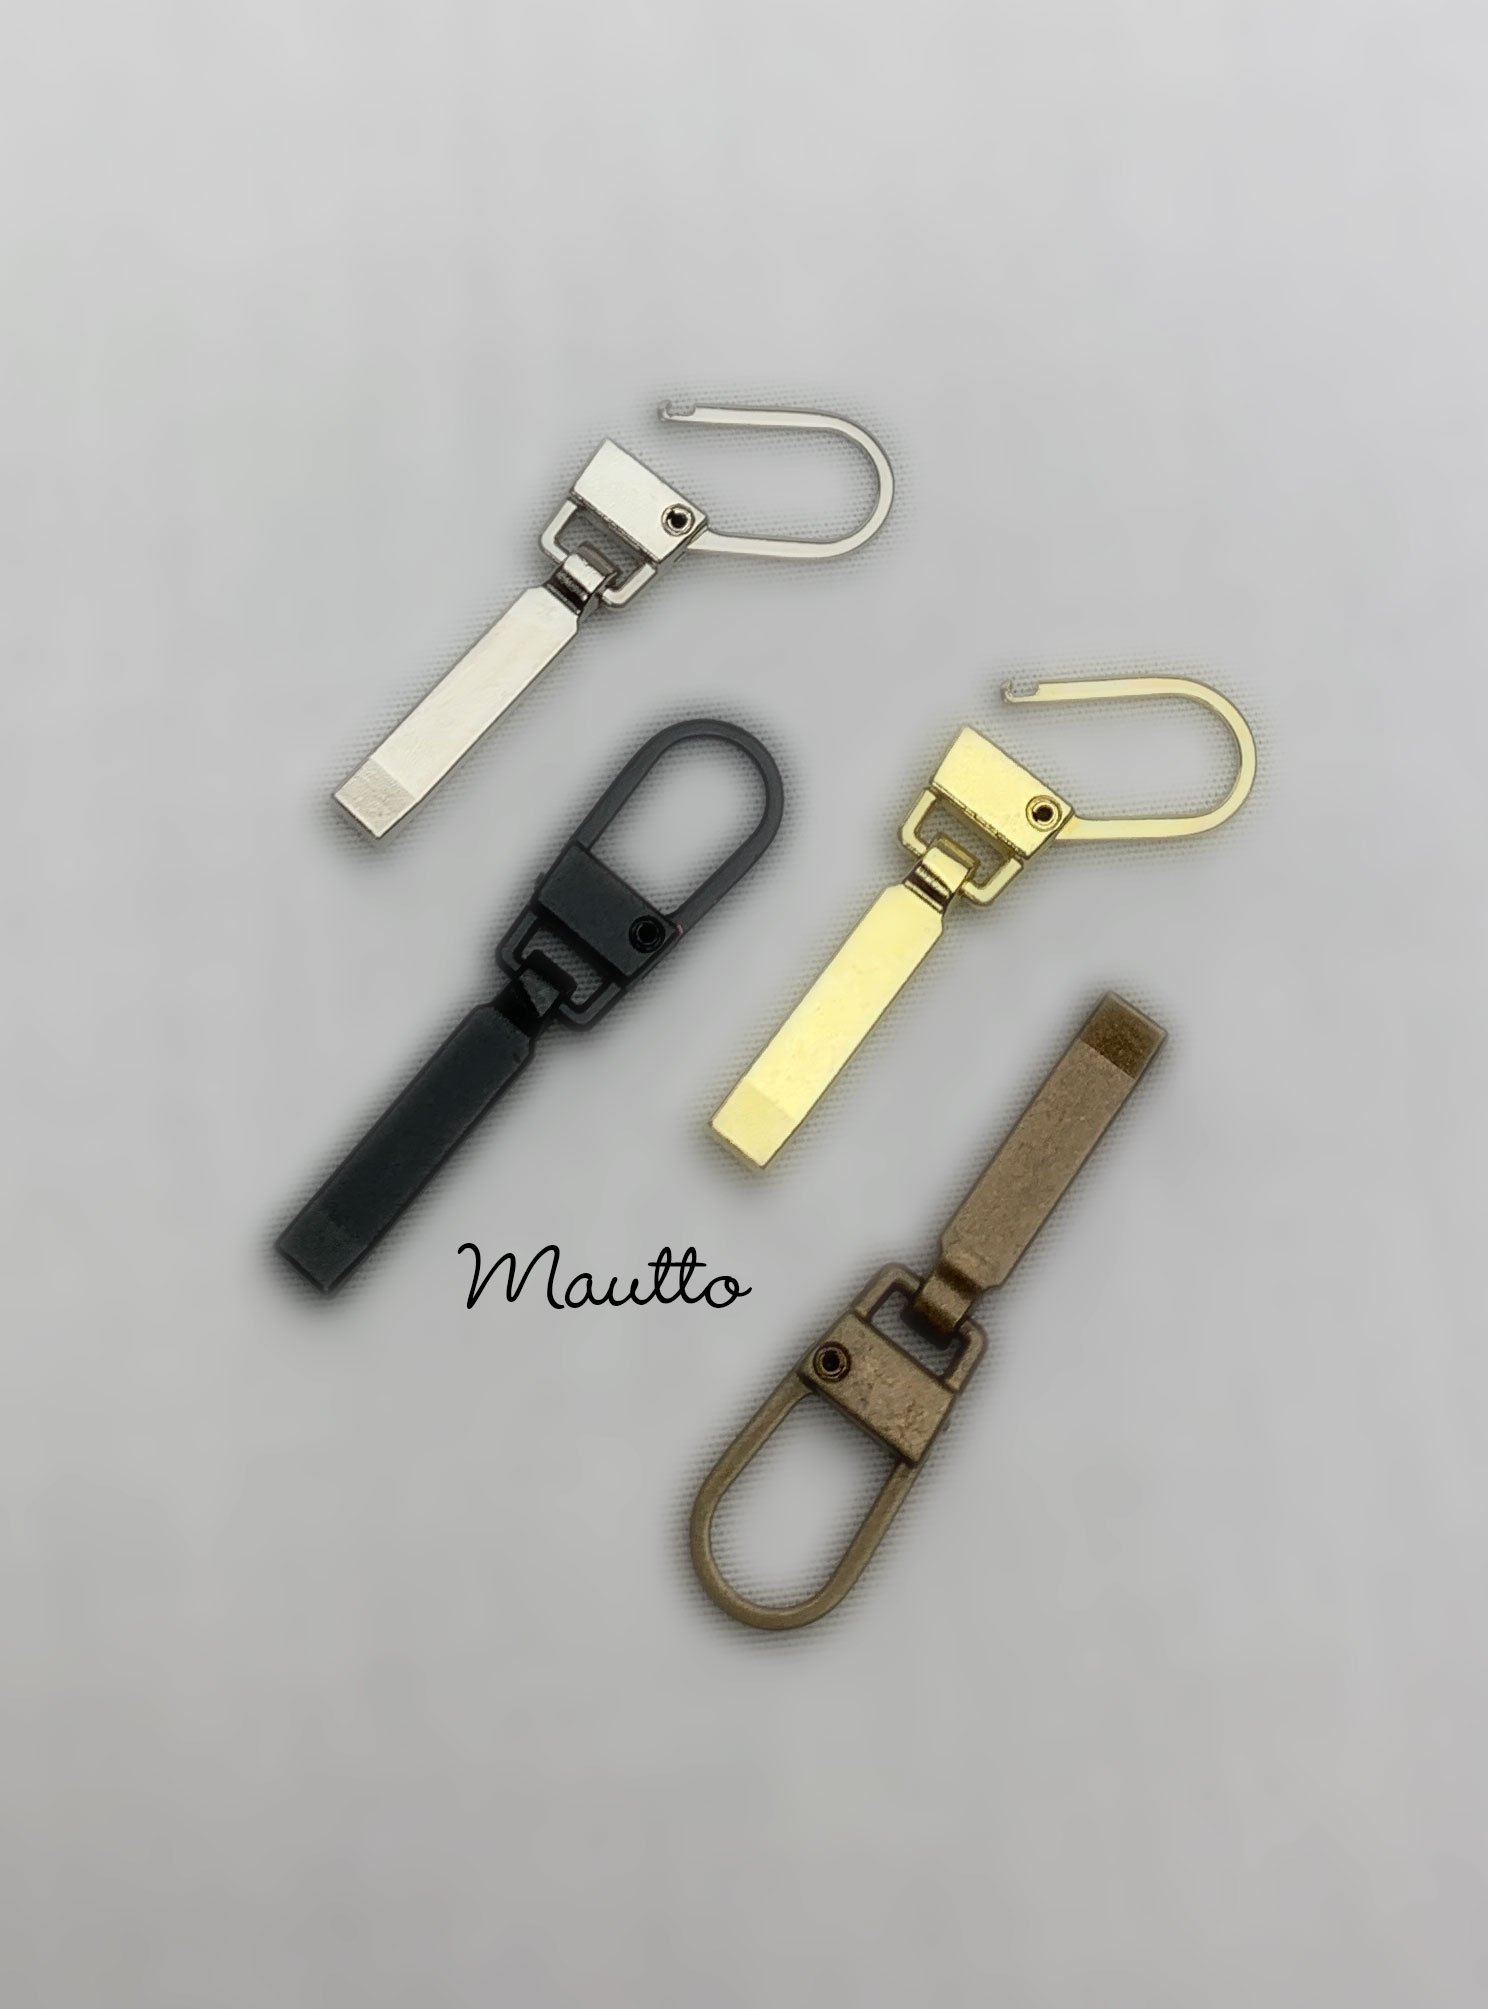 Attachable Replacement Zipper Pulls - Gold, Nickel, Antique Brass, and Black finishes ...